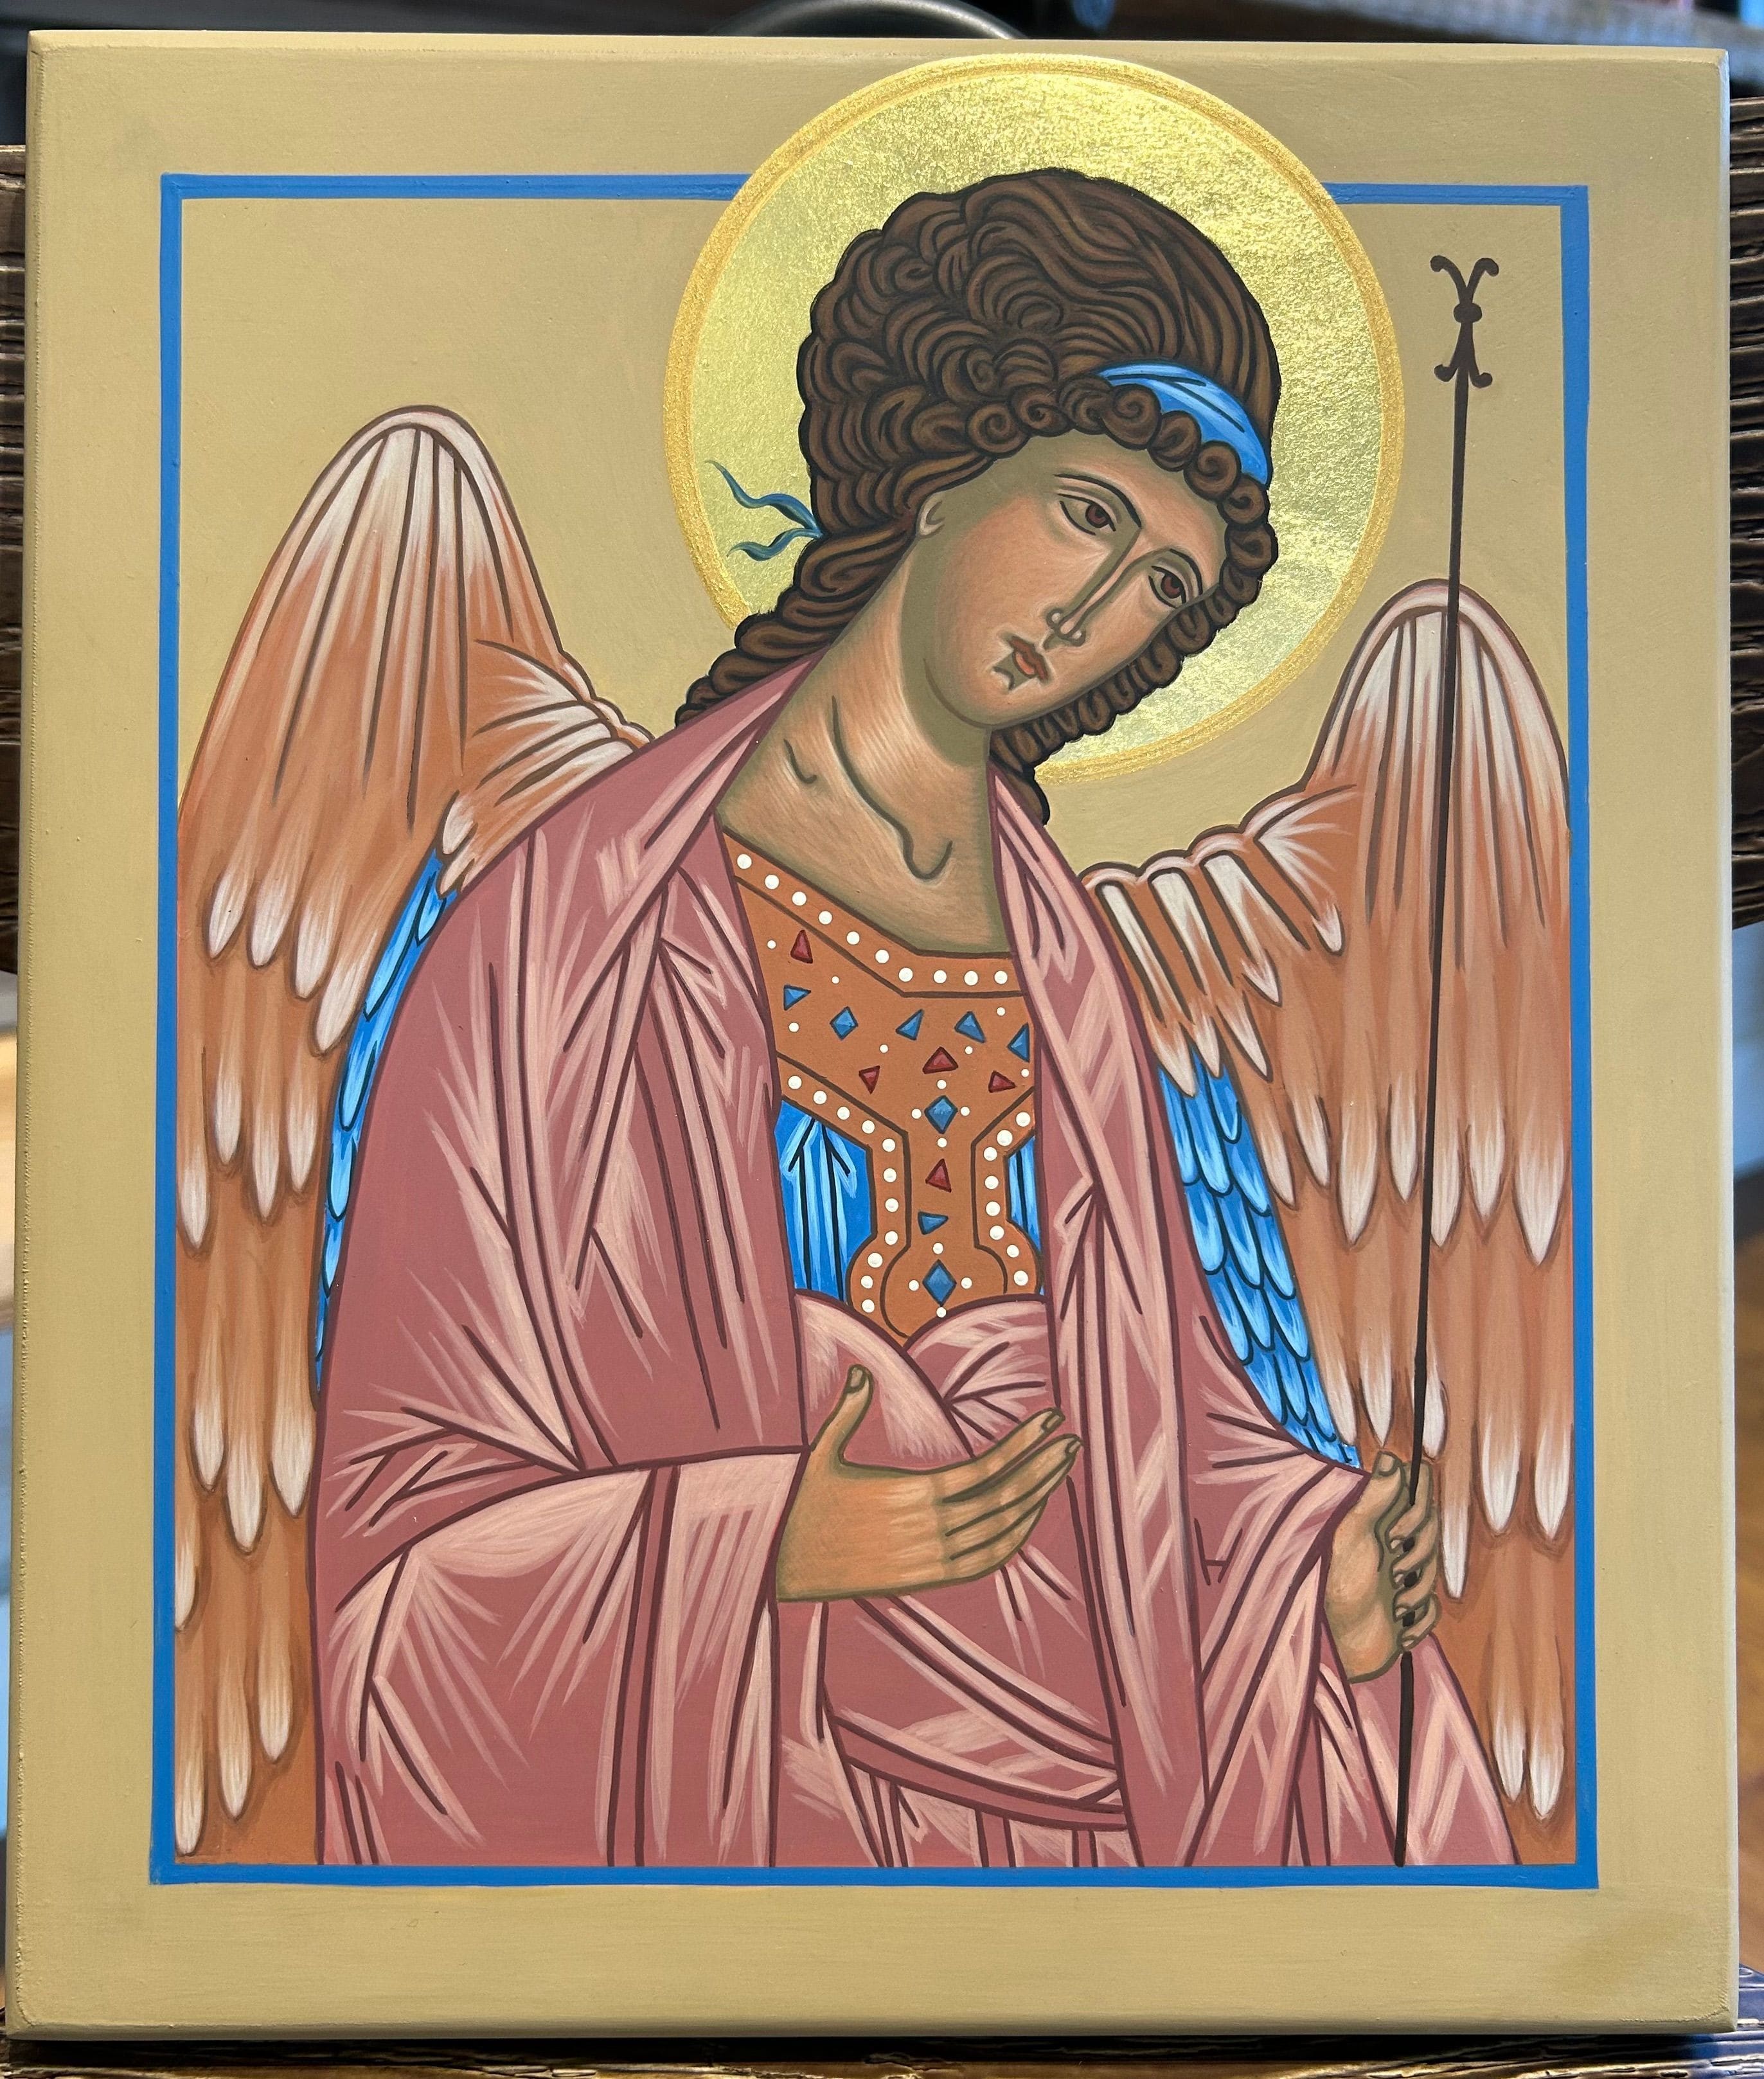 Rublev's Archangel Michael, patron of soldiers, police officers, first responders, holy death. He is also our fierce defender against the devil. Feast Sep 29.